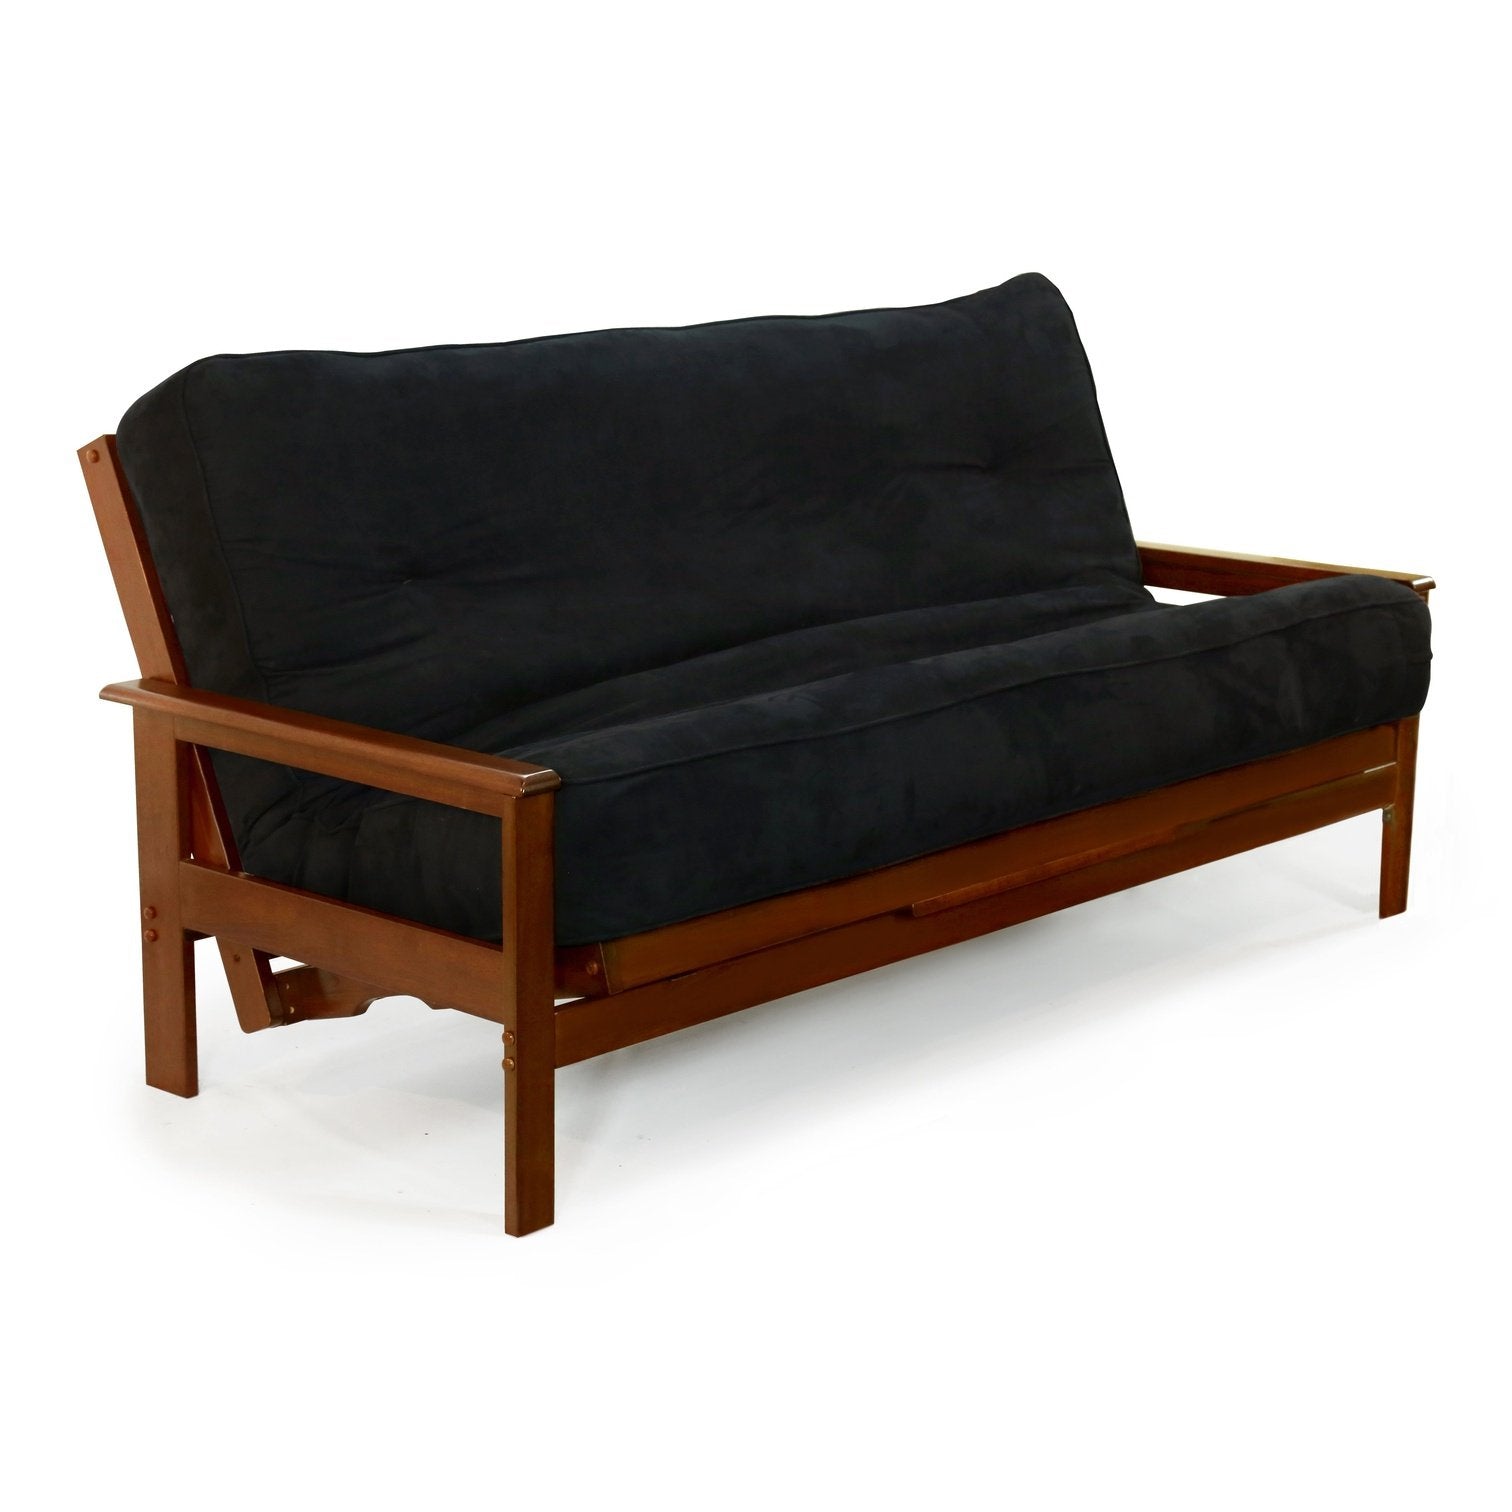 Night and Day Furniture Albany Standard Futon Frame Complete